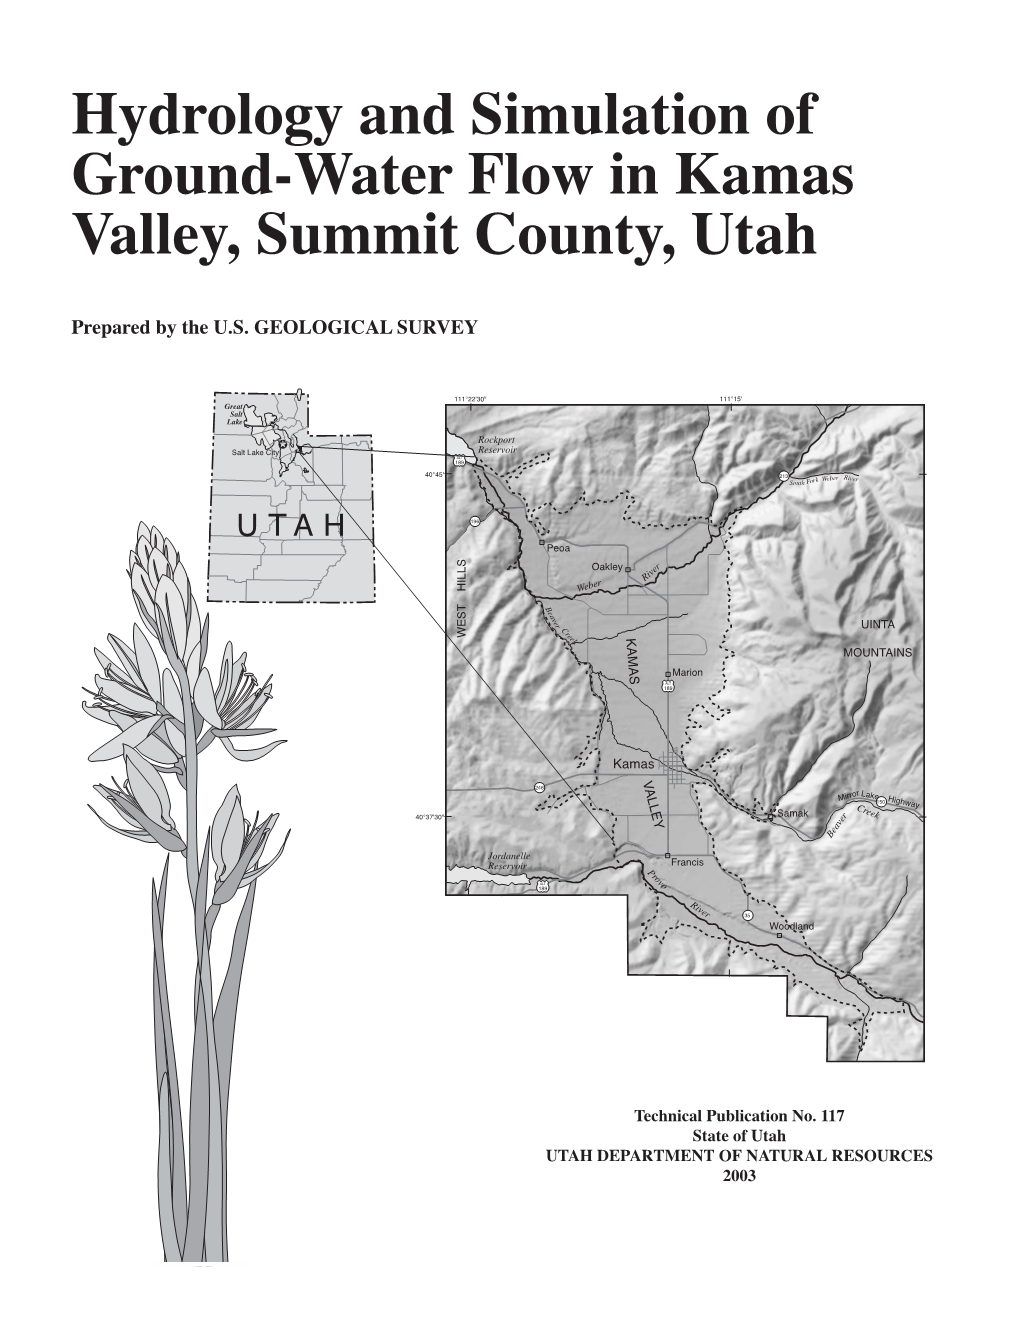 Hydrology and Simulation of Ground-Water Flow in Kamas Valley, Summit County, Utah